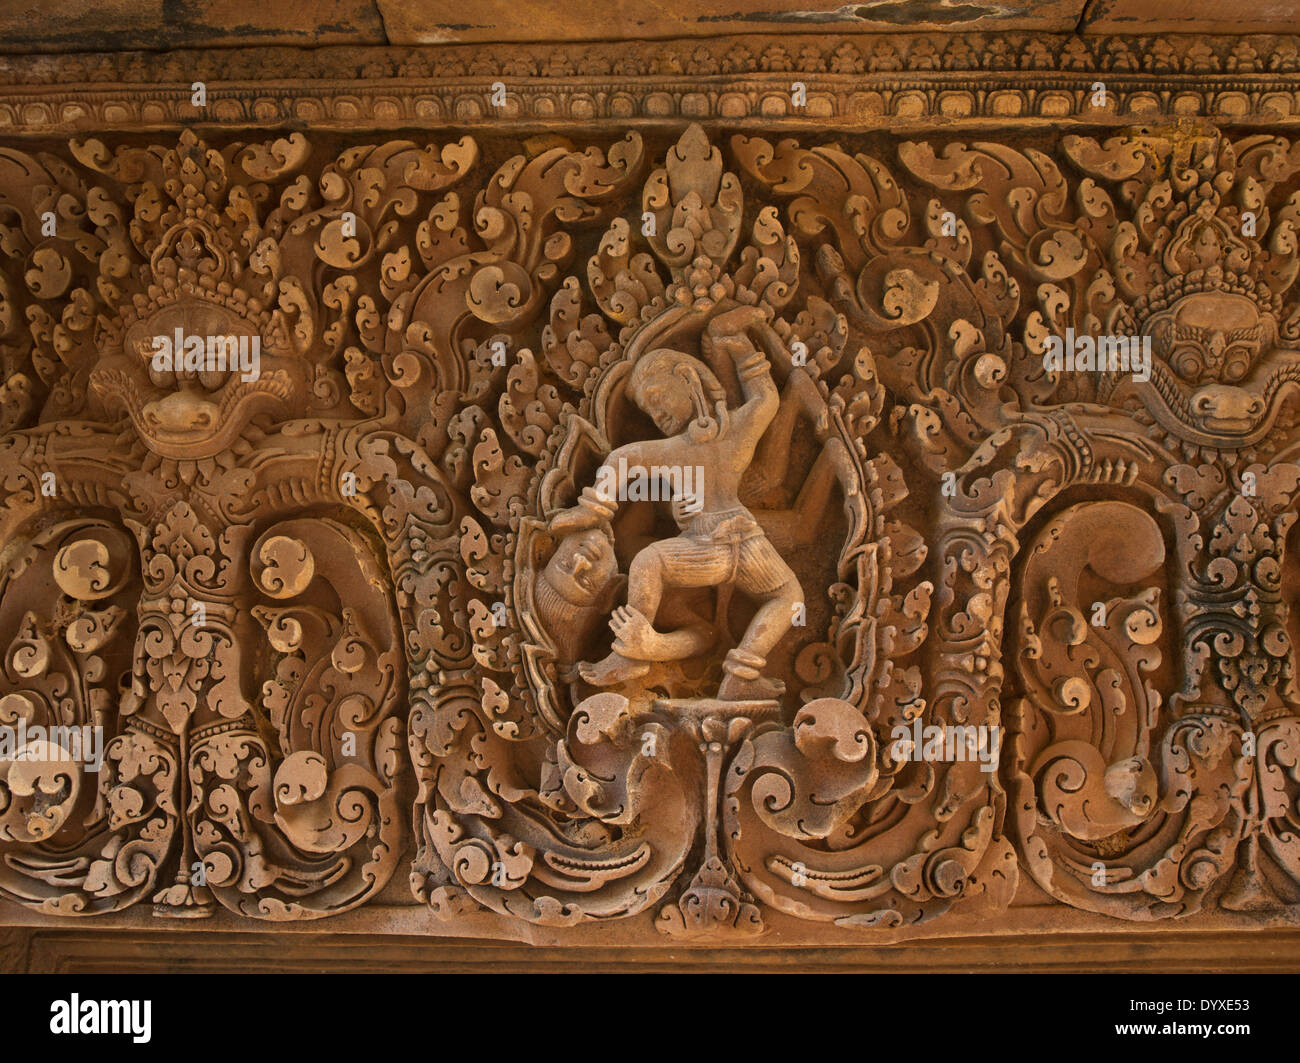 Ornate carvings in the sandstone lintels above doorways at Banteay Srei a Hindu Temple dedicated to Shiva. Siem Reap, Cambodia Stock Photo